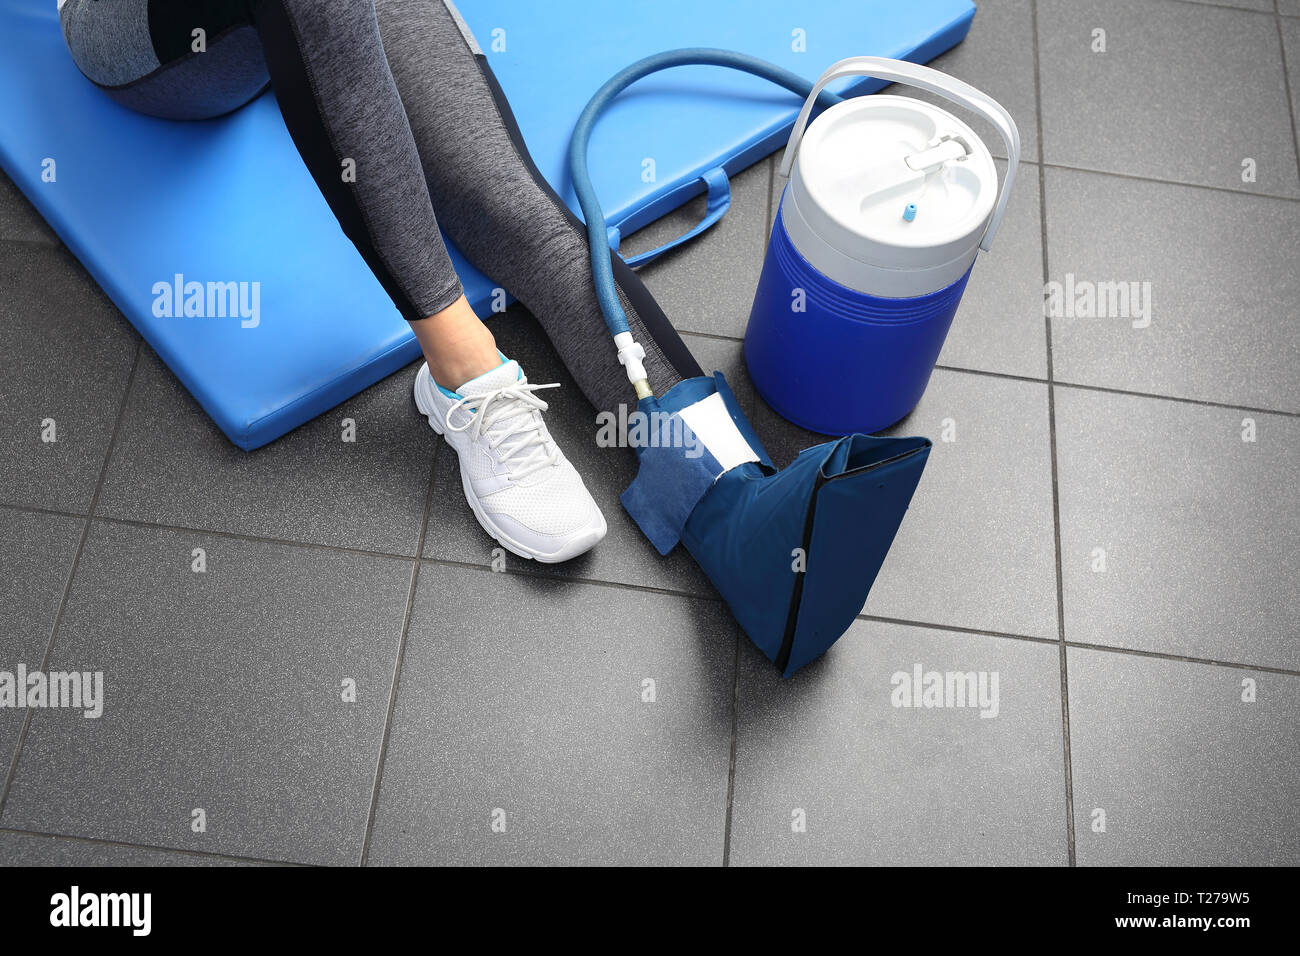 Cold treatment. A woman with a cooled input on the leg. Stock Photo